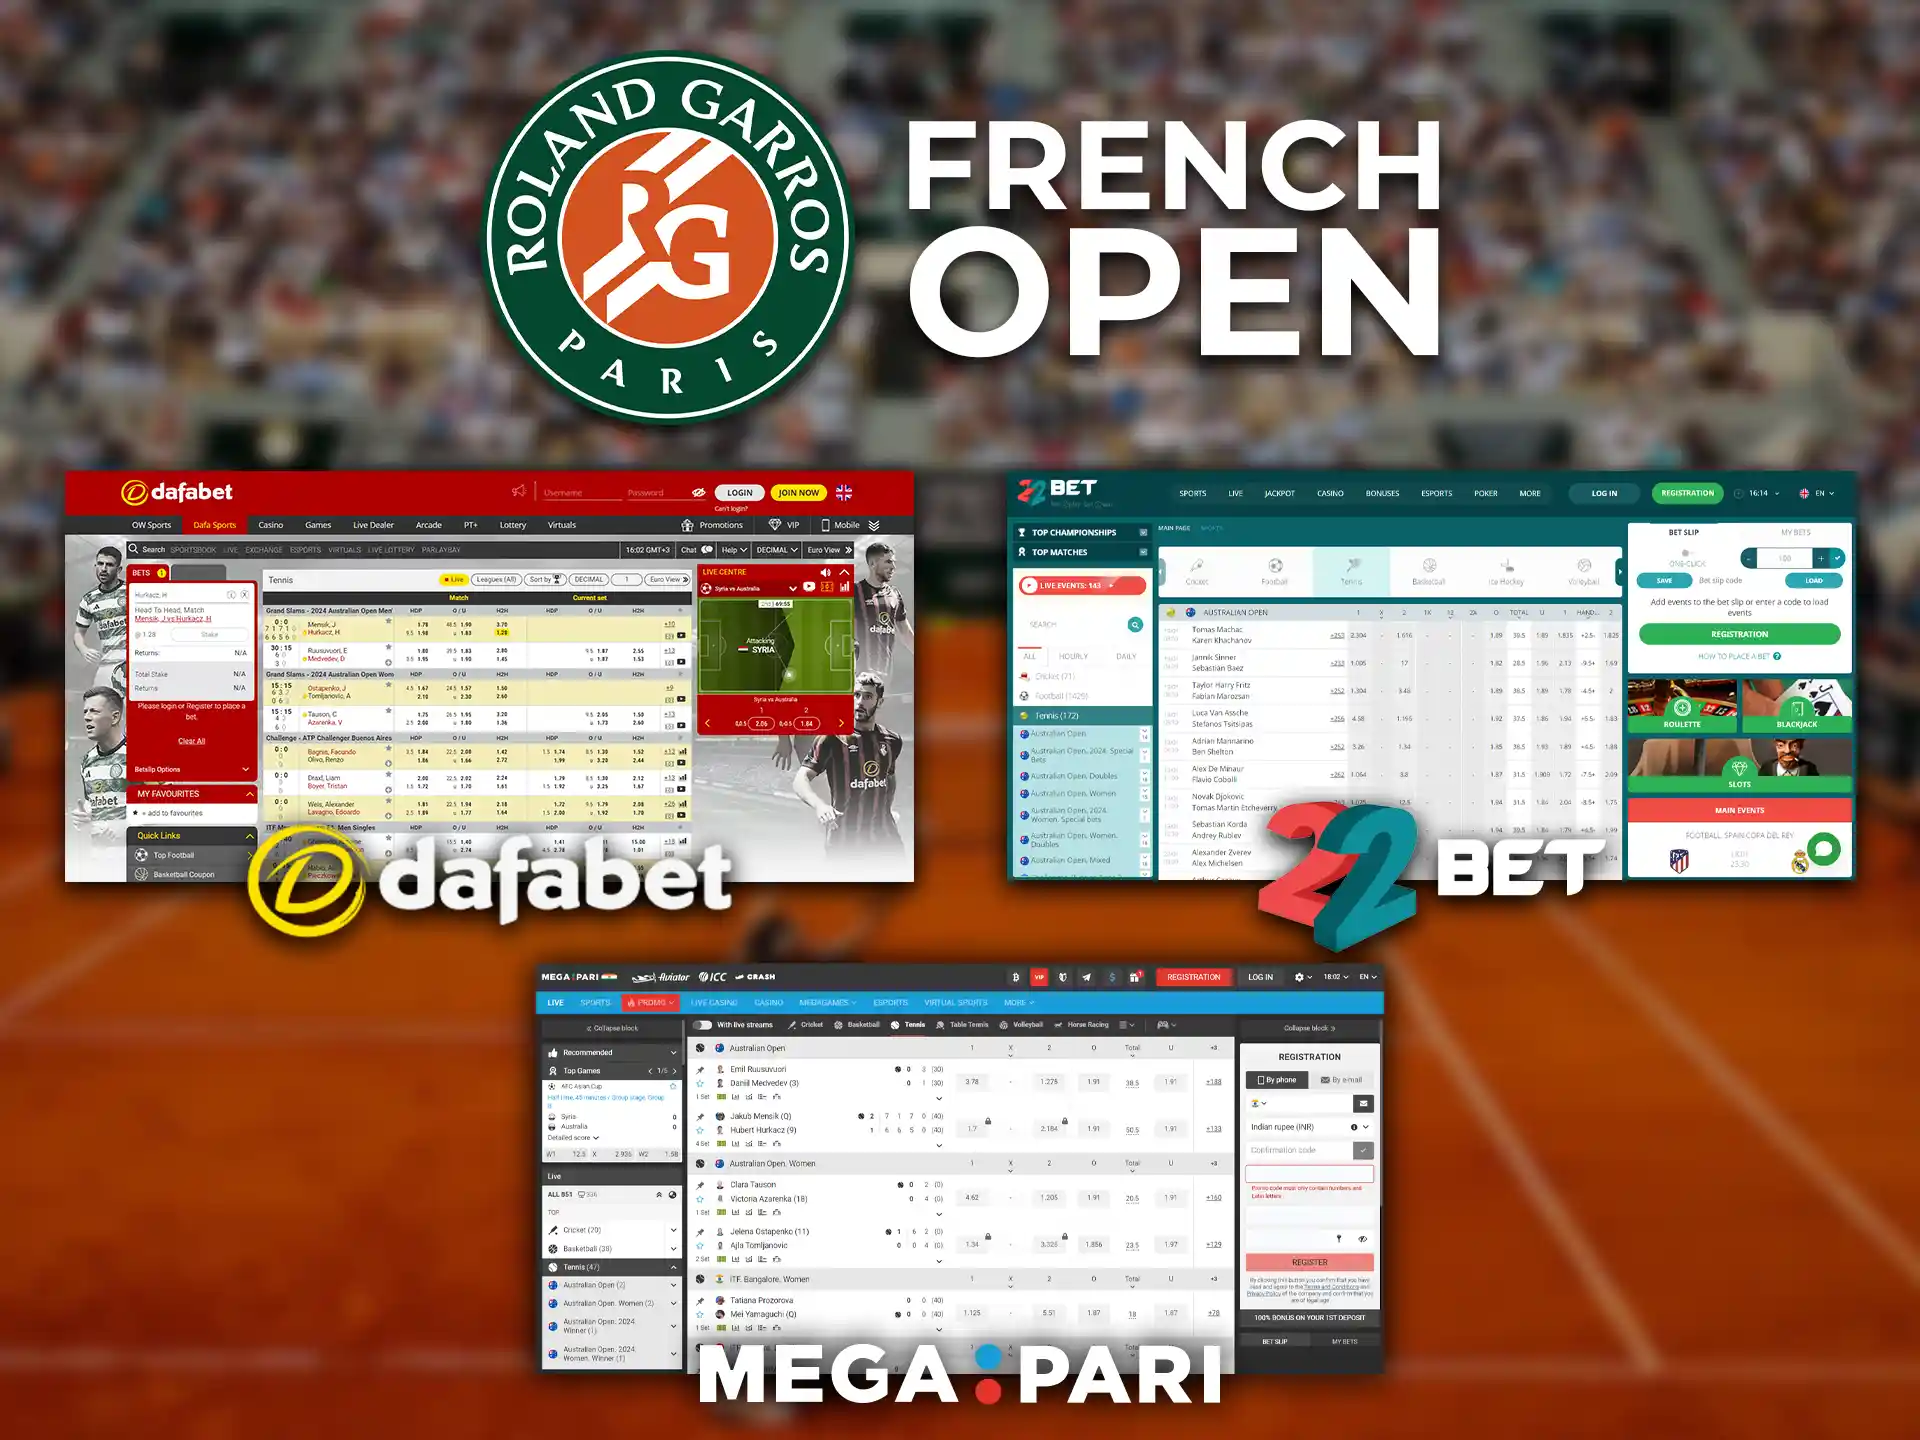 Place your bets at Dafabet, 22Bet or Megapari on the French Open Tennis Championships.